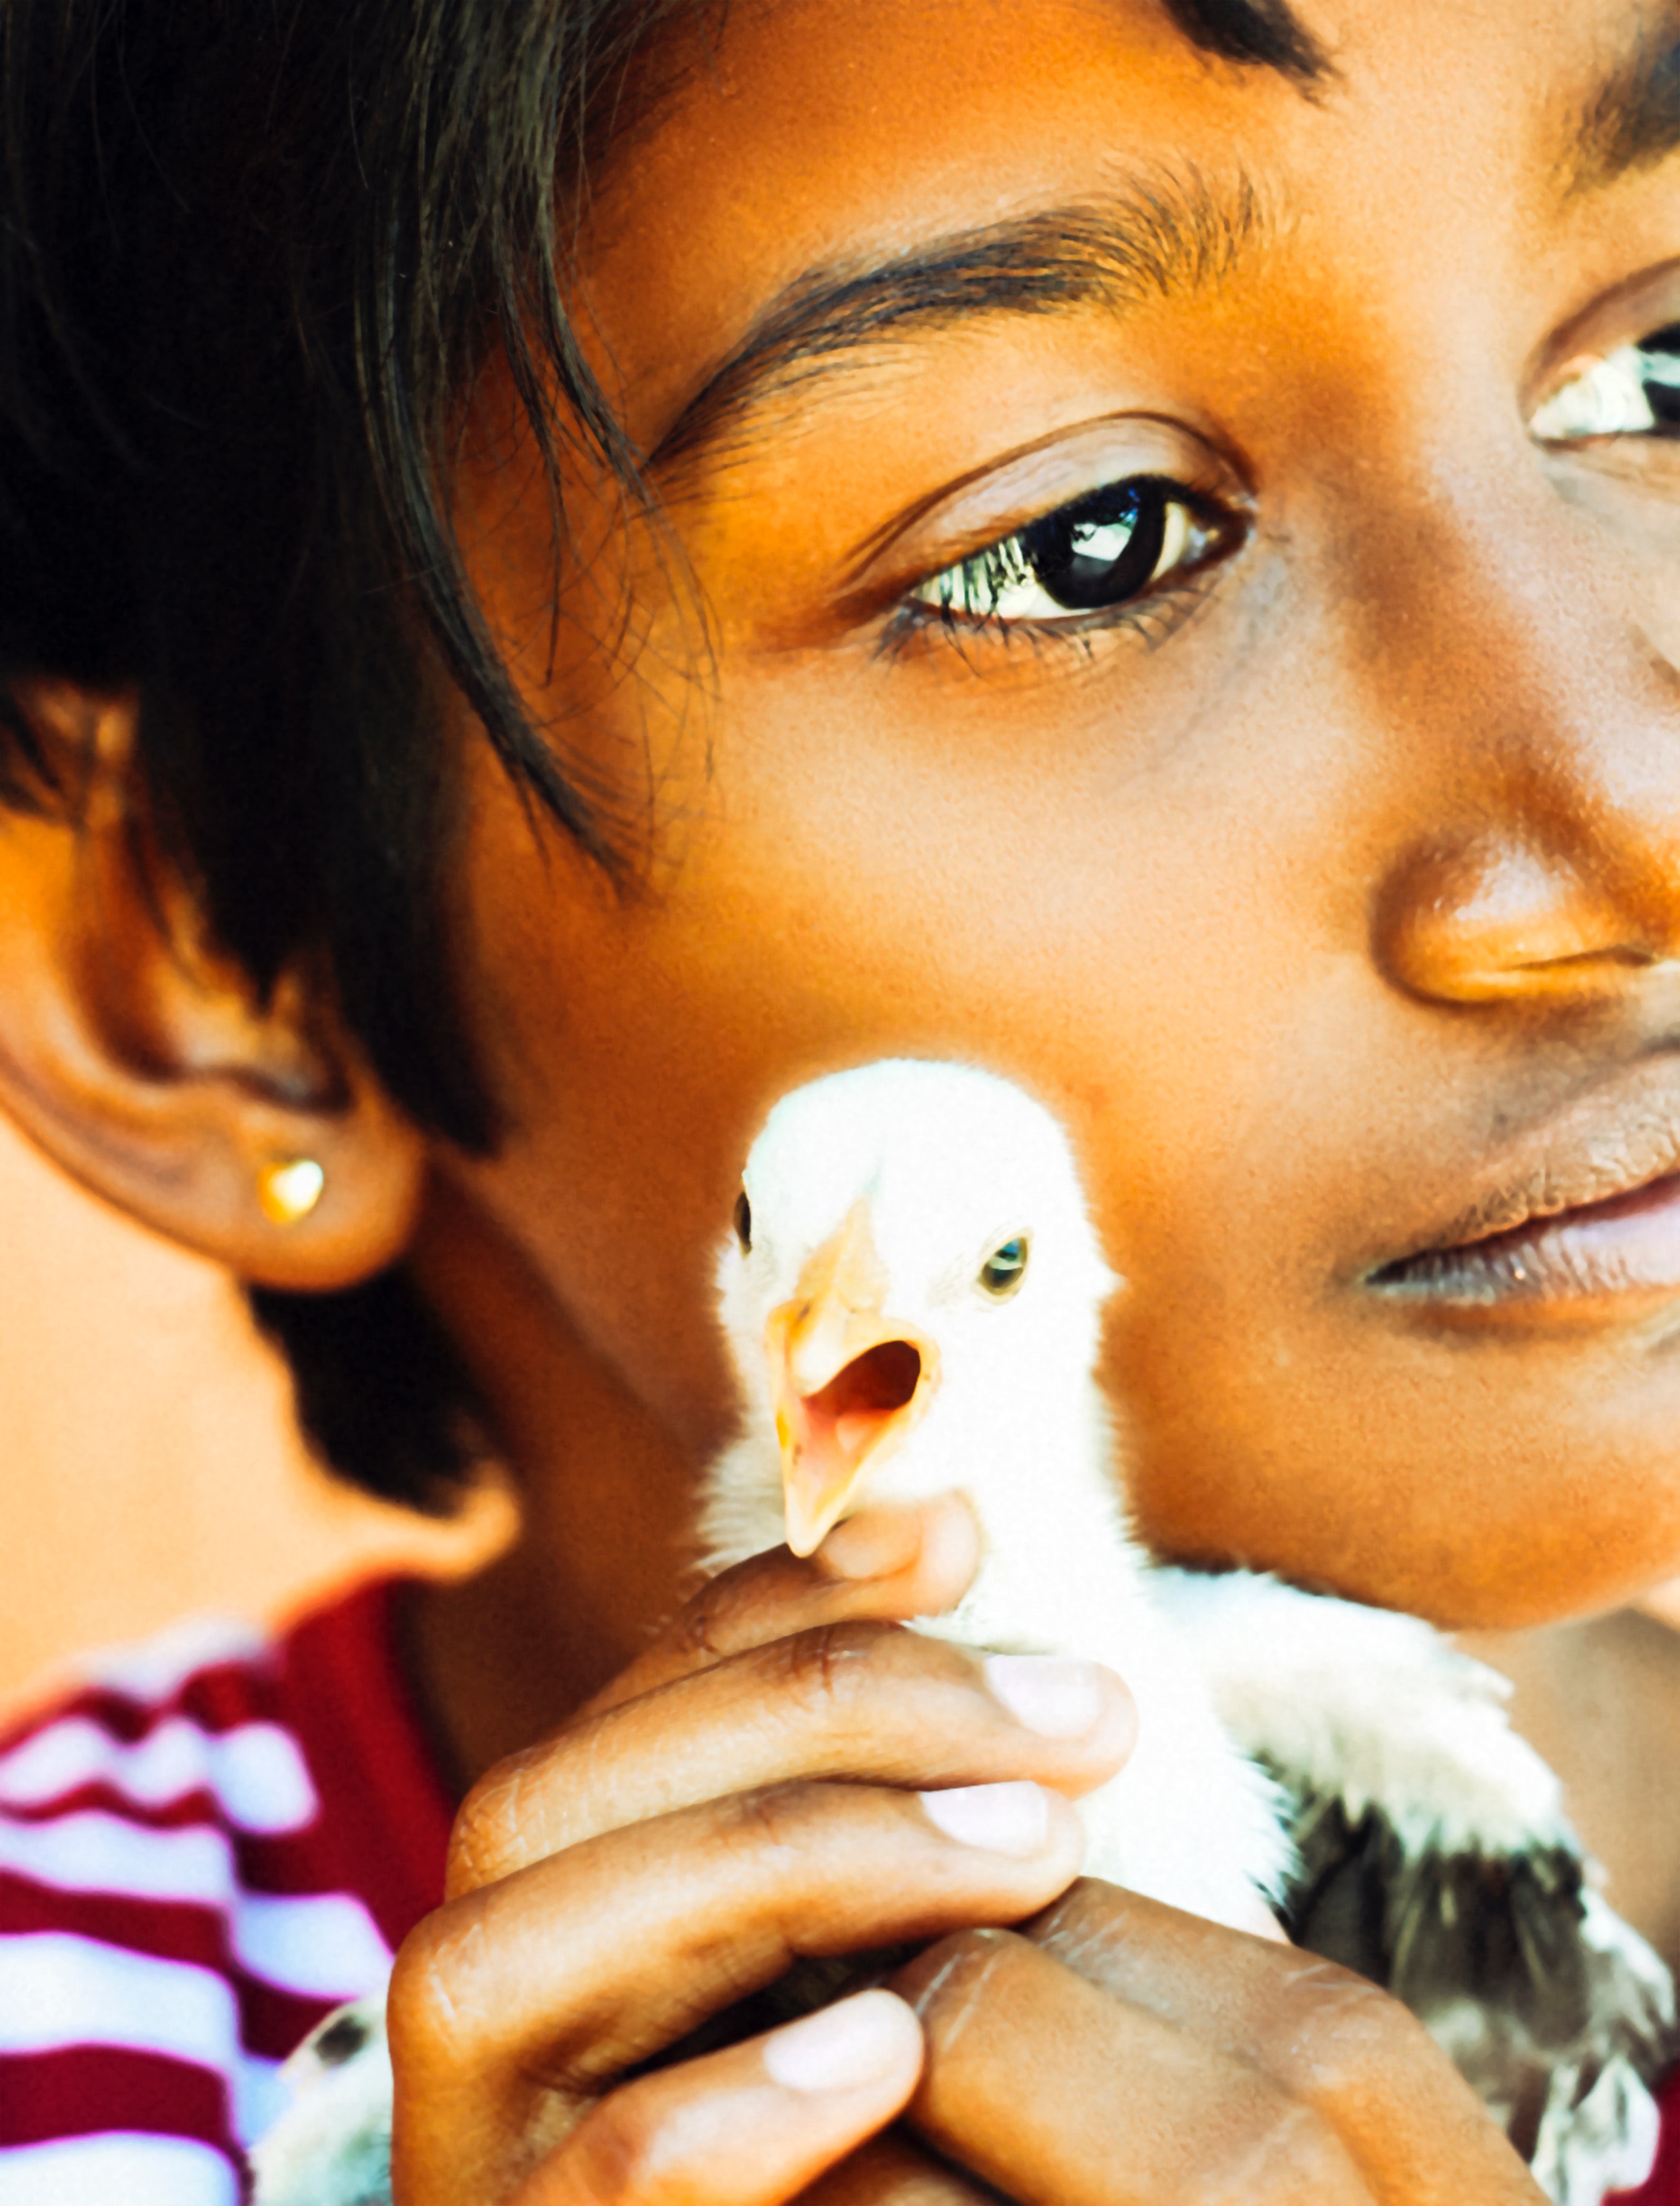 Child Holding White Chick, Chick, Child, Eyes, Face, HQ Photo